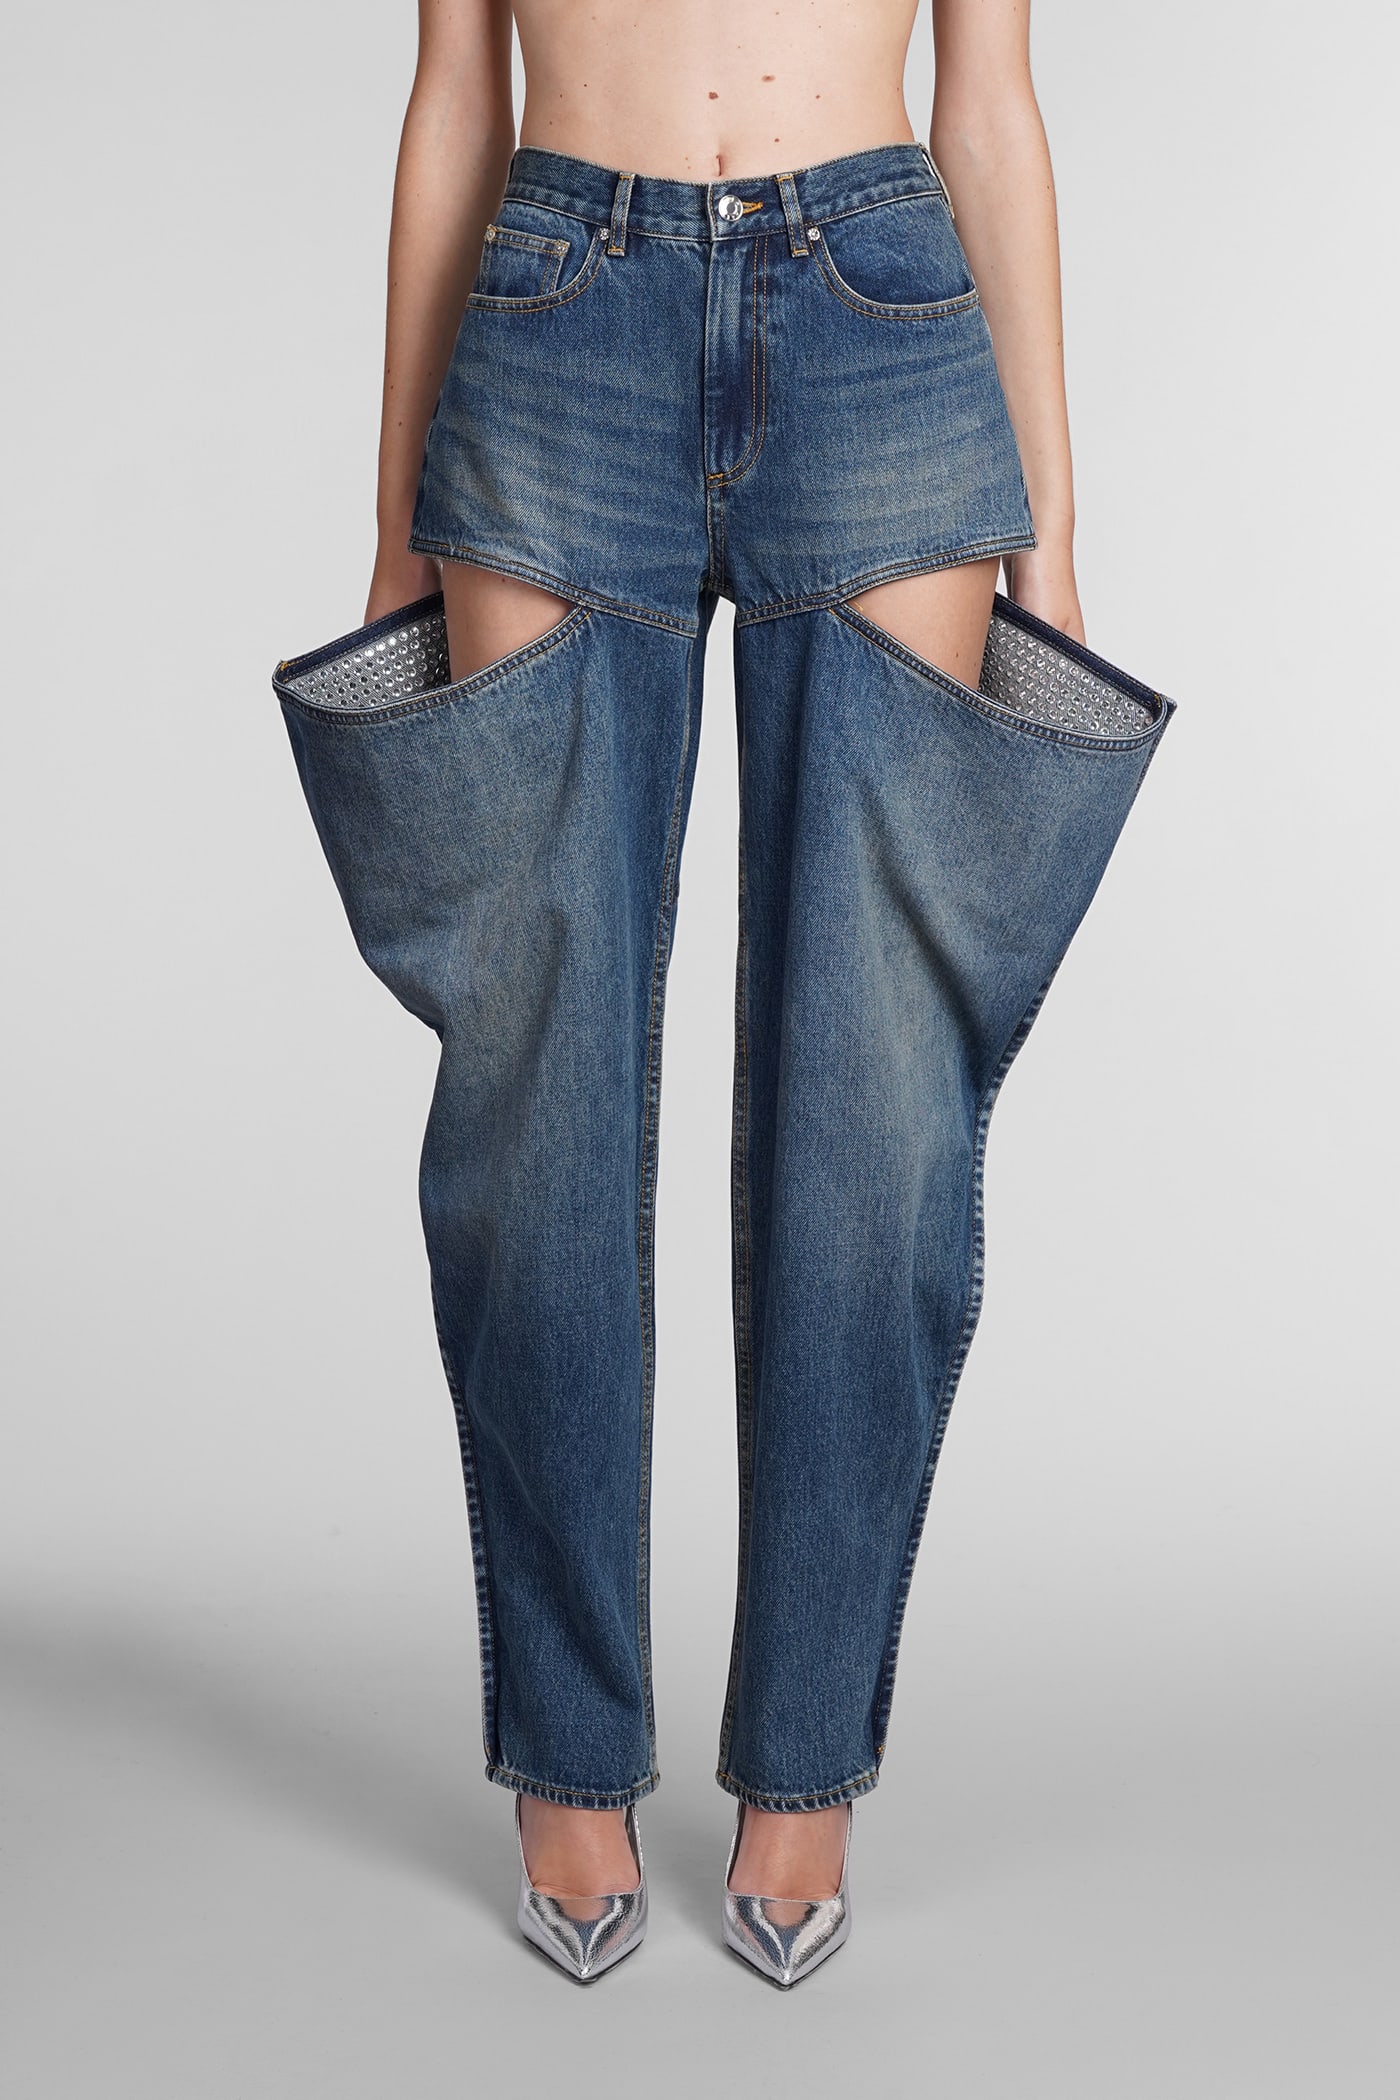 AREA JEANS IN BLUE COTTON